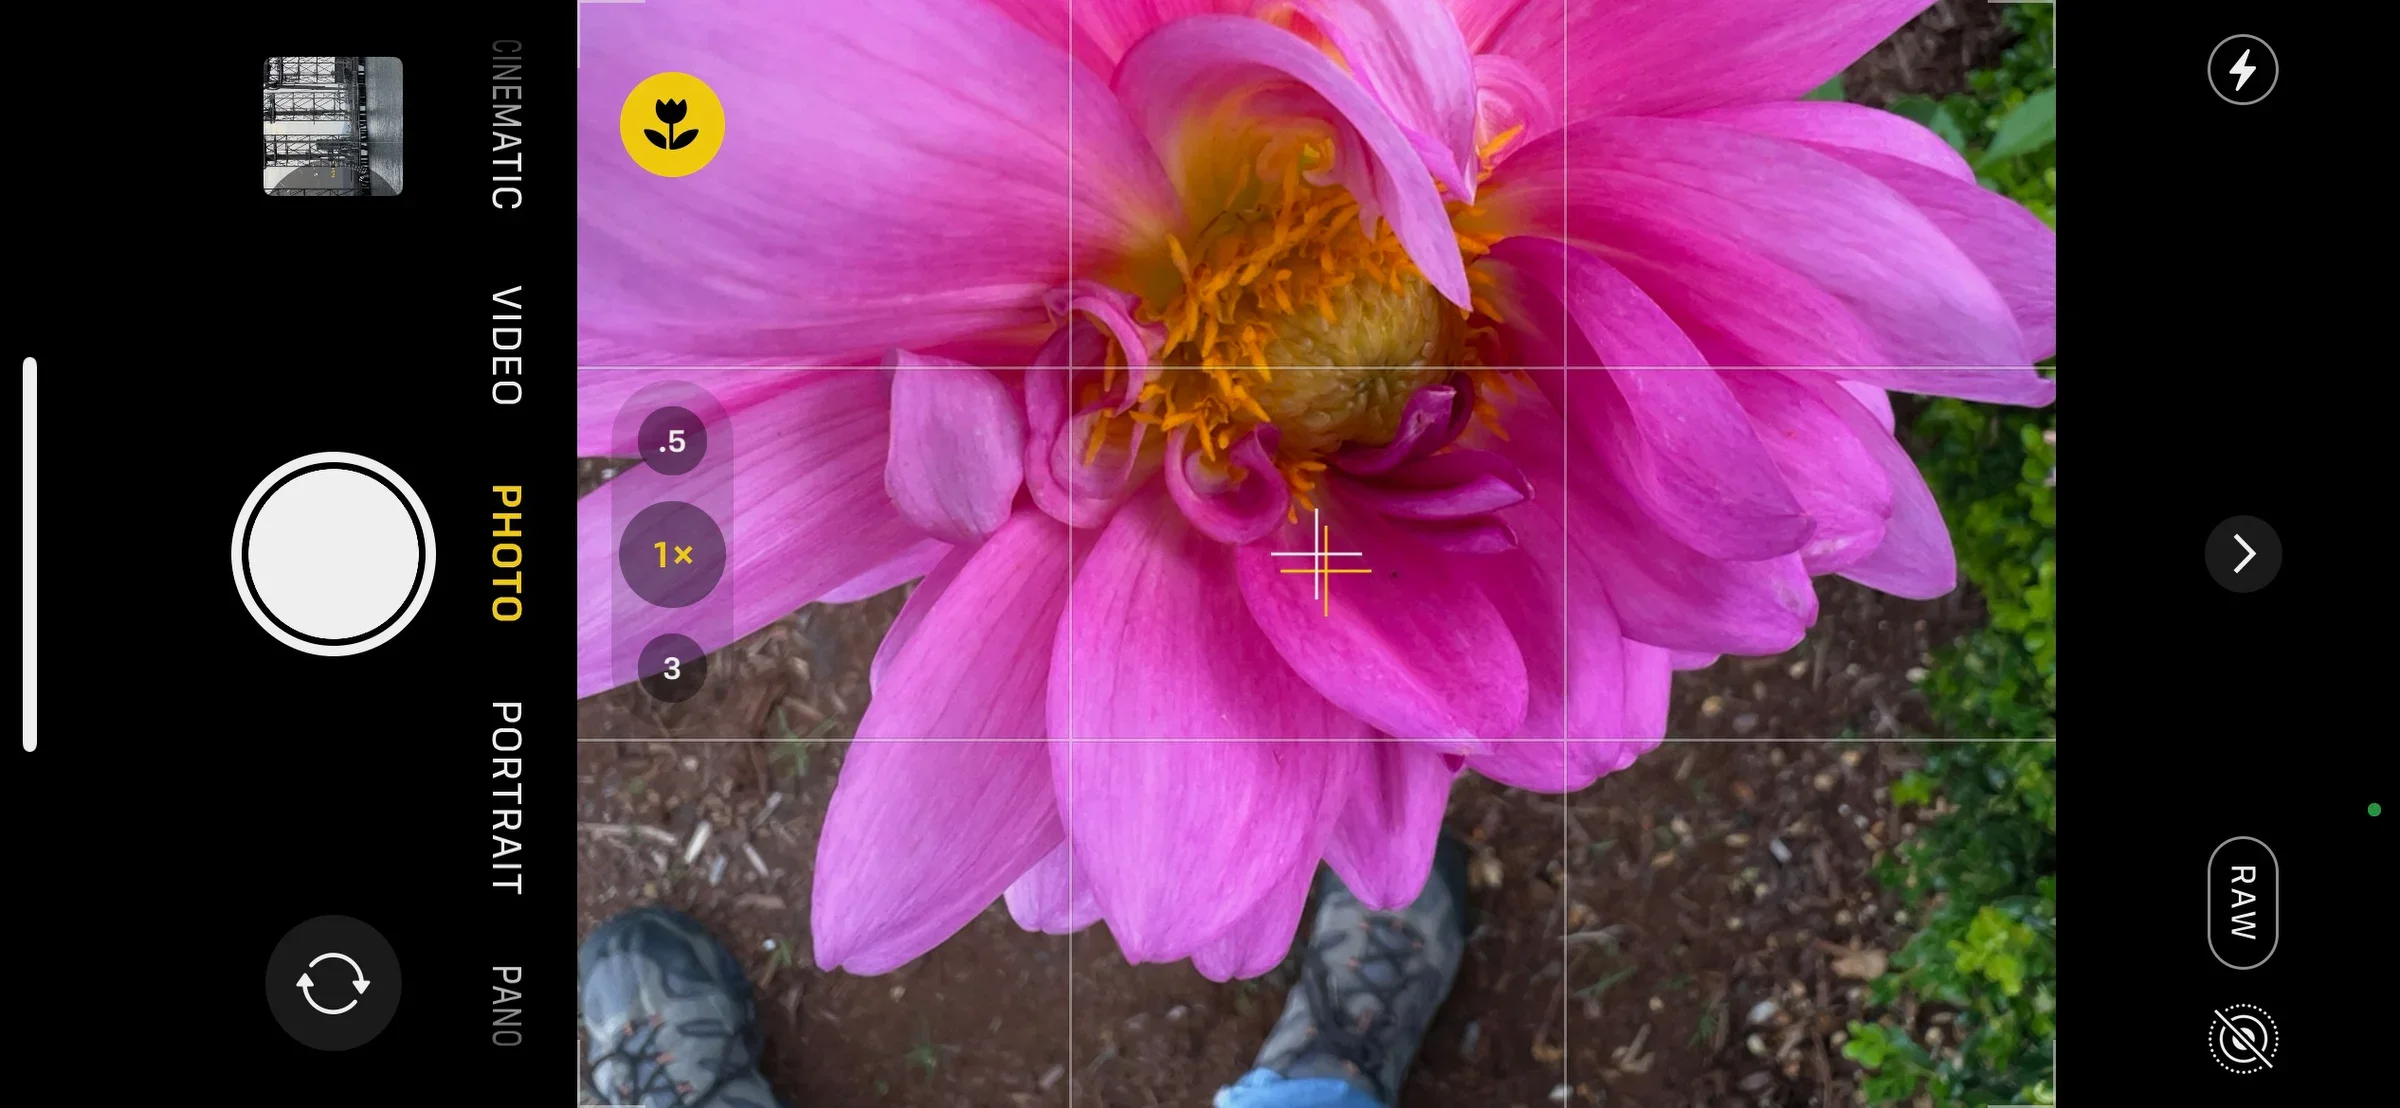 Your Smartphone Camera Has Great Hidden Features – Here's How To Find Them